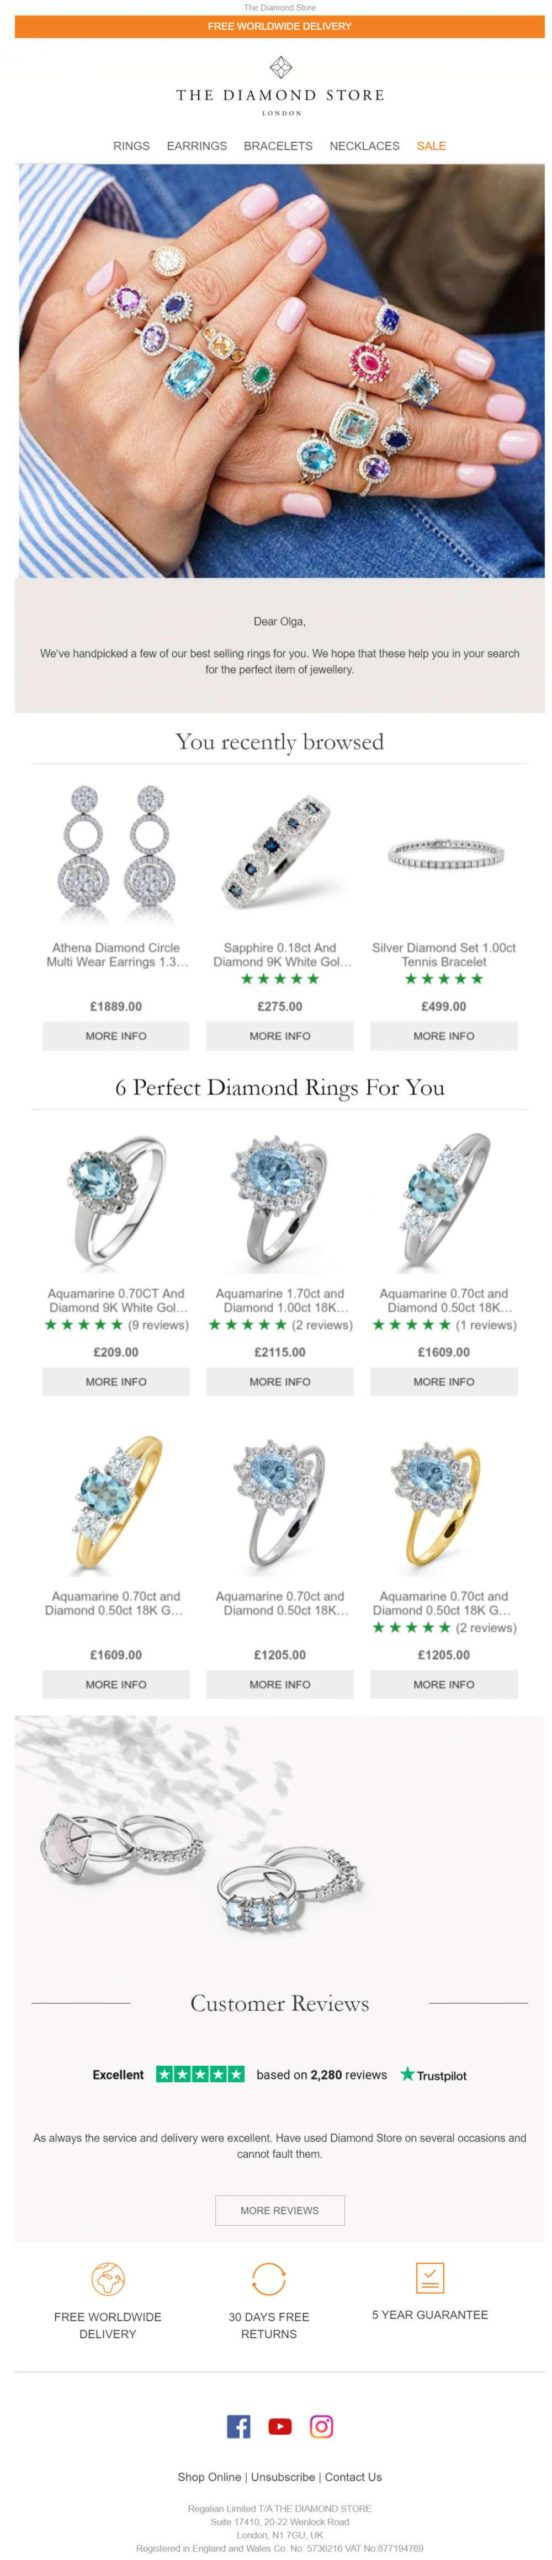 The_Diamond_Store_-_Rings_Browse_Abandon